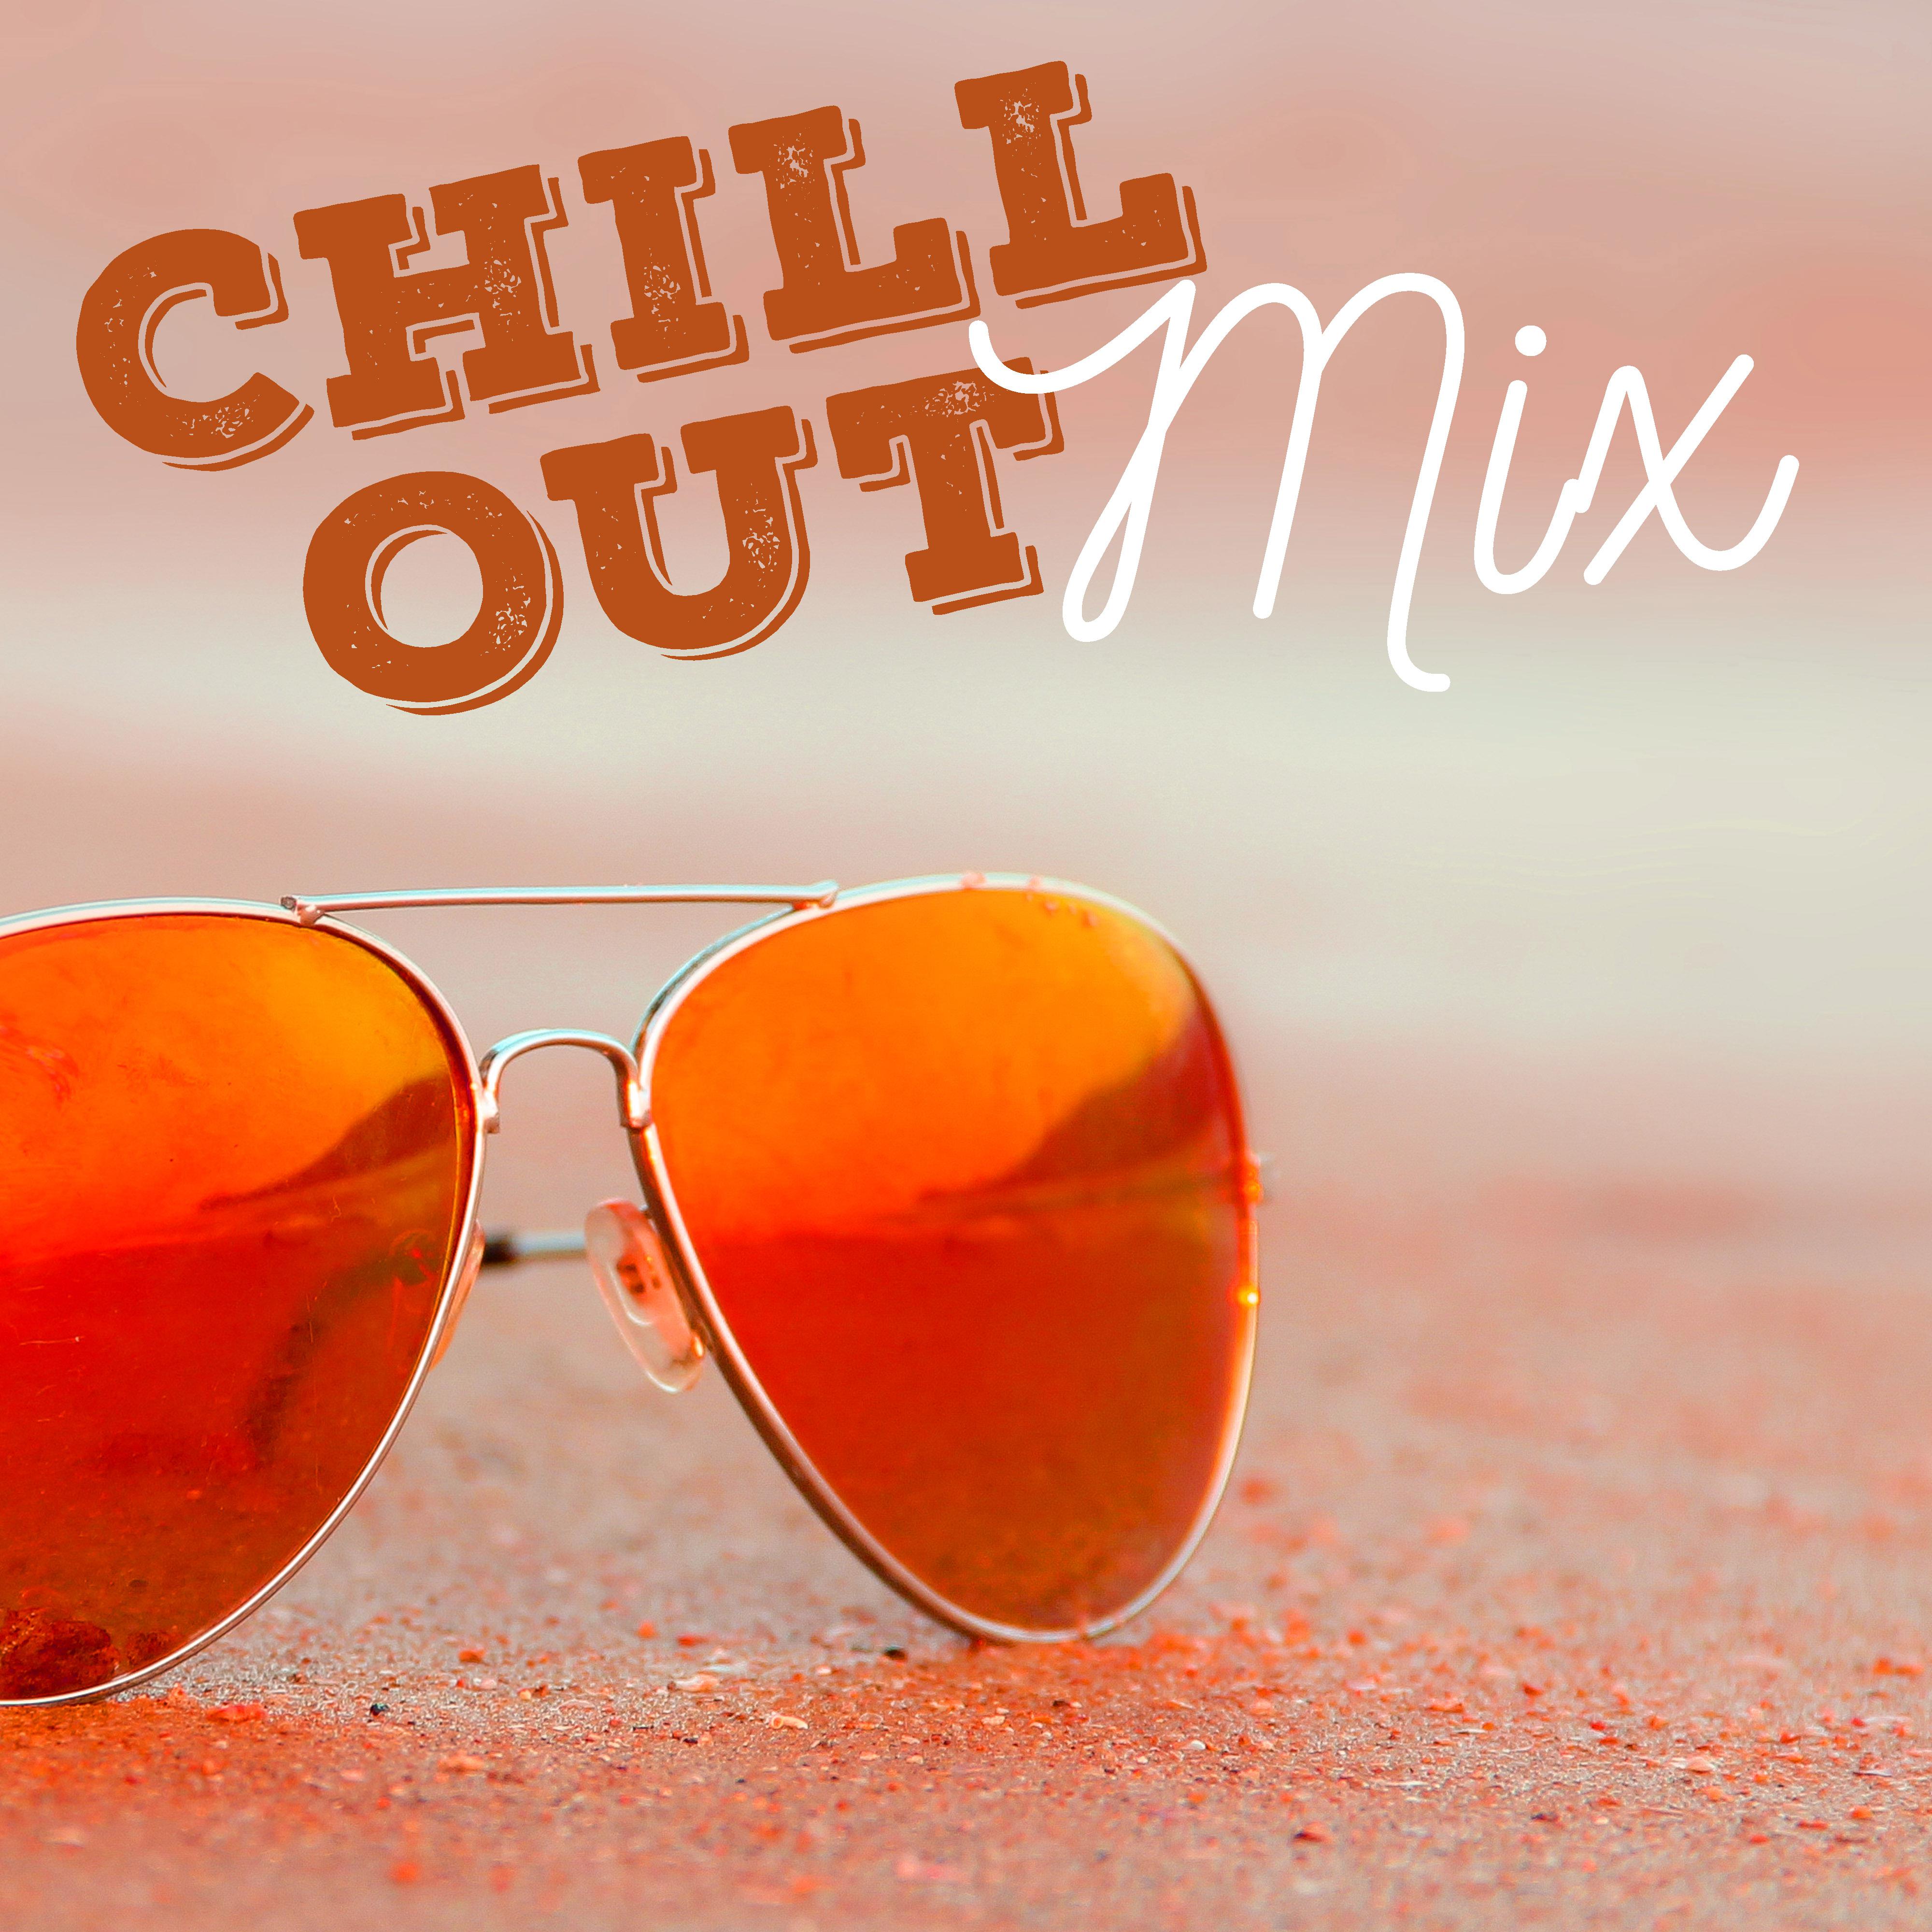 Chill Out Mix – Relaxing Music, Peaceful Mind, Asian Chill, Summer 2017, Ambient Music, Pure Rest